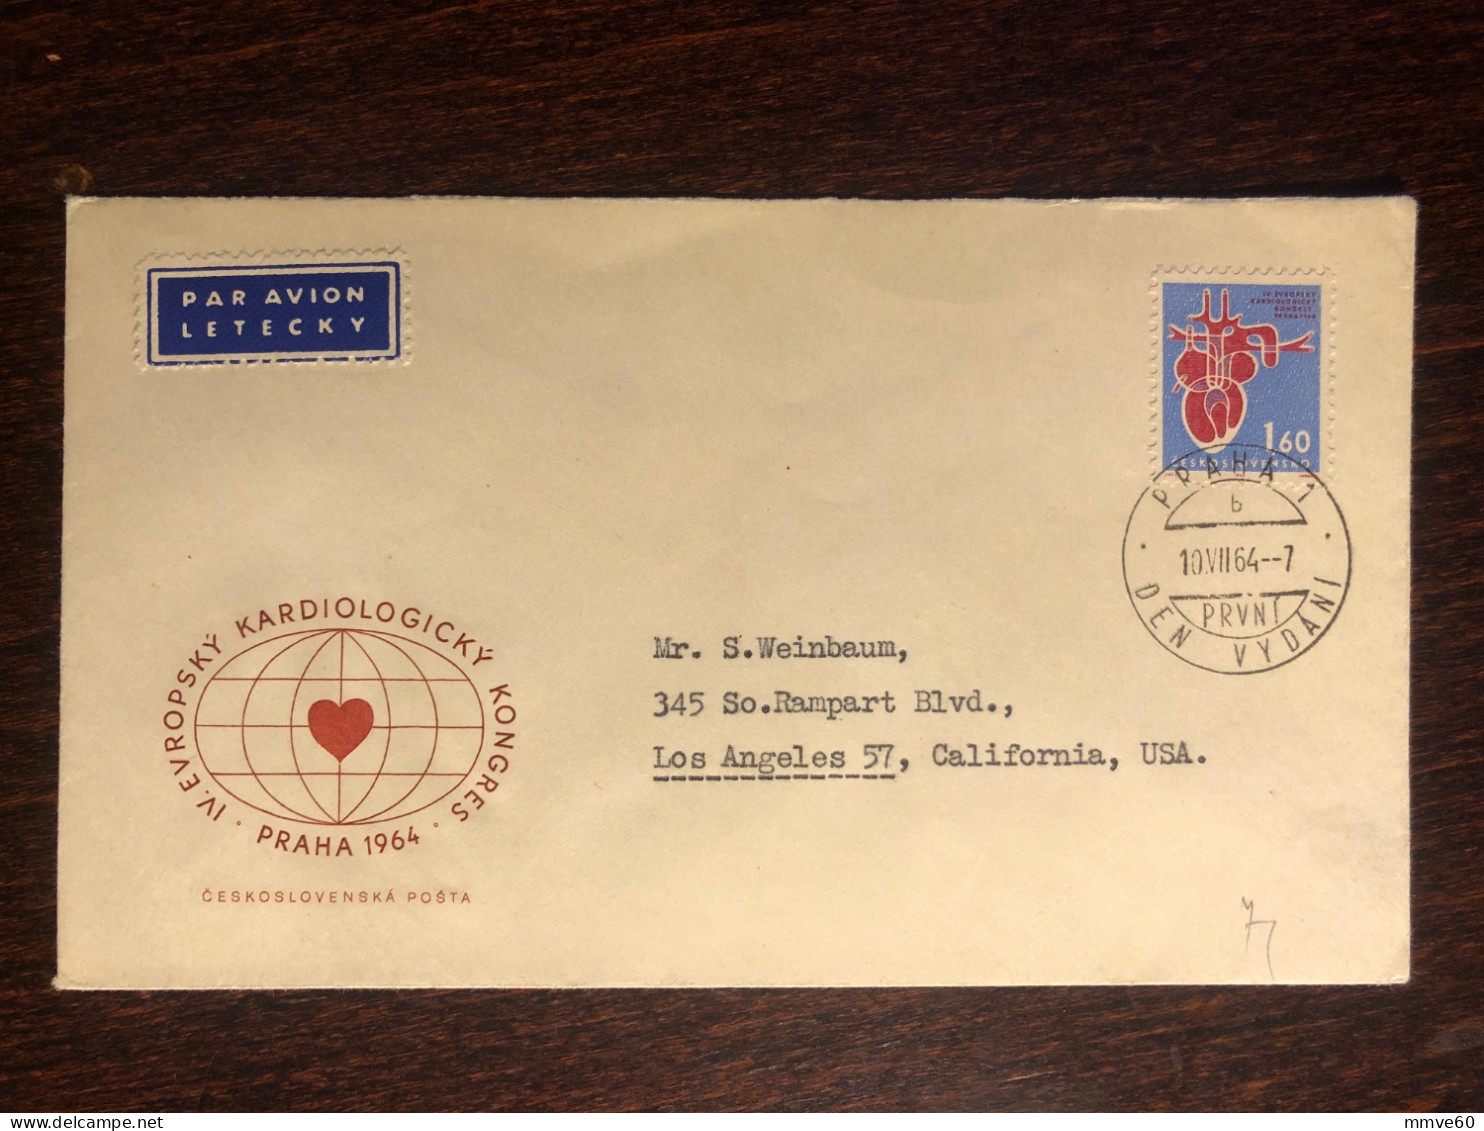 CZECHOSLOVAKIA FDC COVER 1964 YEAR CARDIOLOGY HEART HEALTH MEDICINE STAMPS - FDC